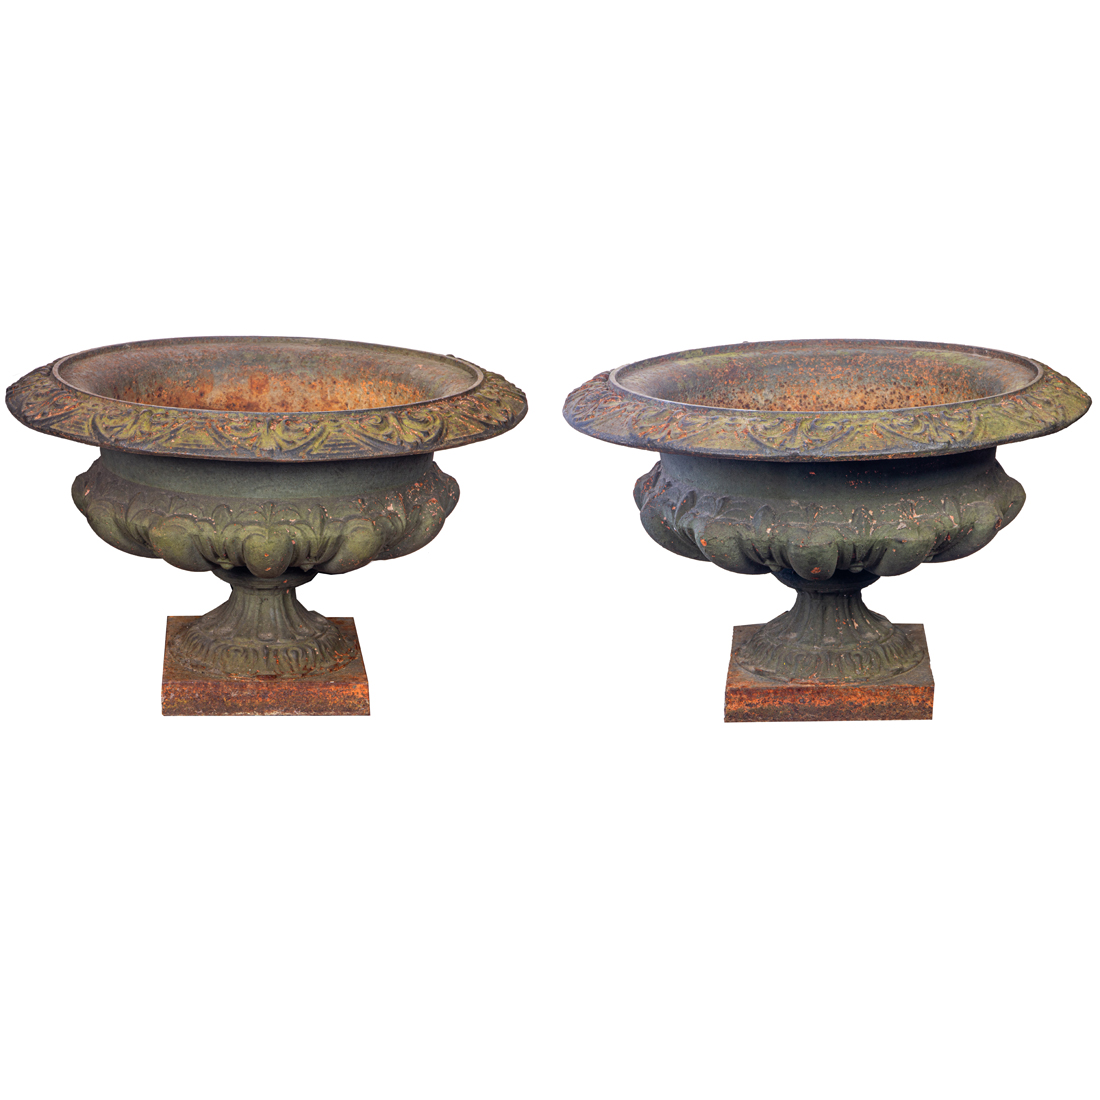 A PAIR OF NEOCLASSICAL STYLE PATINATED 3a177e